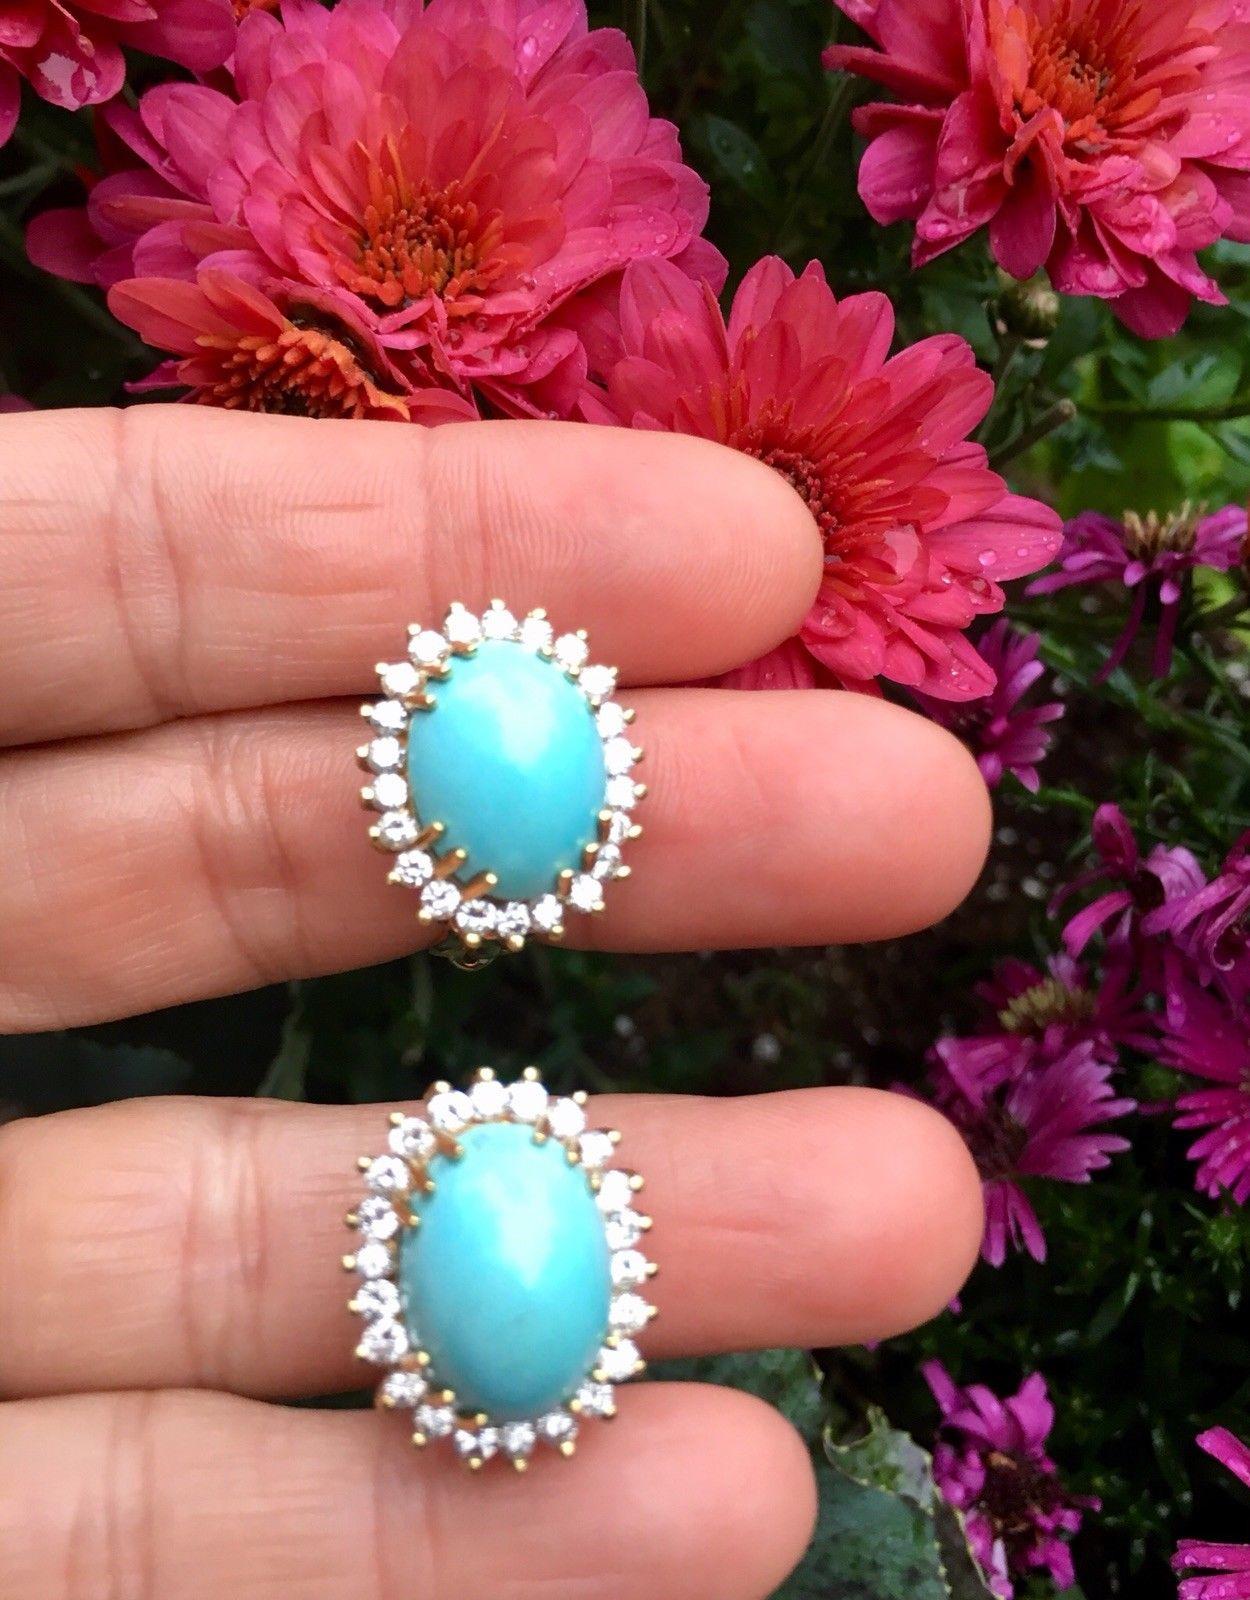 Stunning and elegant 14 karat gold pierced earrings set with 18 carats of oval cabochon turquoise and 1.75 carats of round brilliant cut diamonds, with H color and VS2-SI1 Clarity. Sparkly and white!! 

The earrings are tested for 14K purity.  They